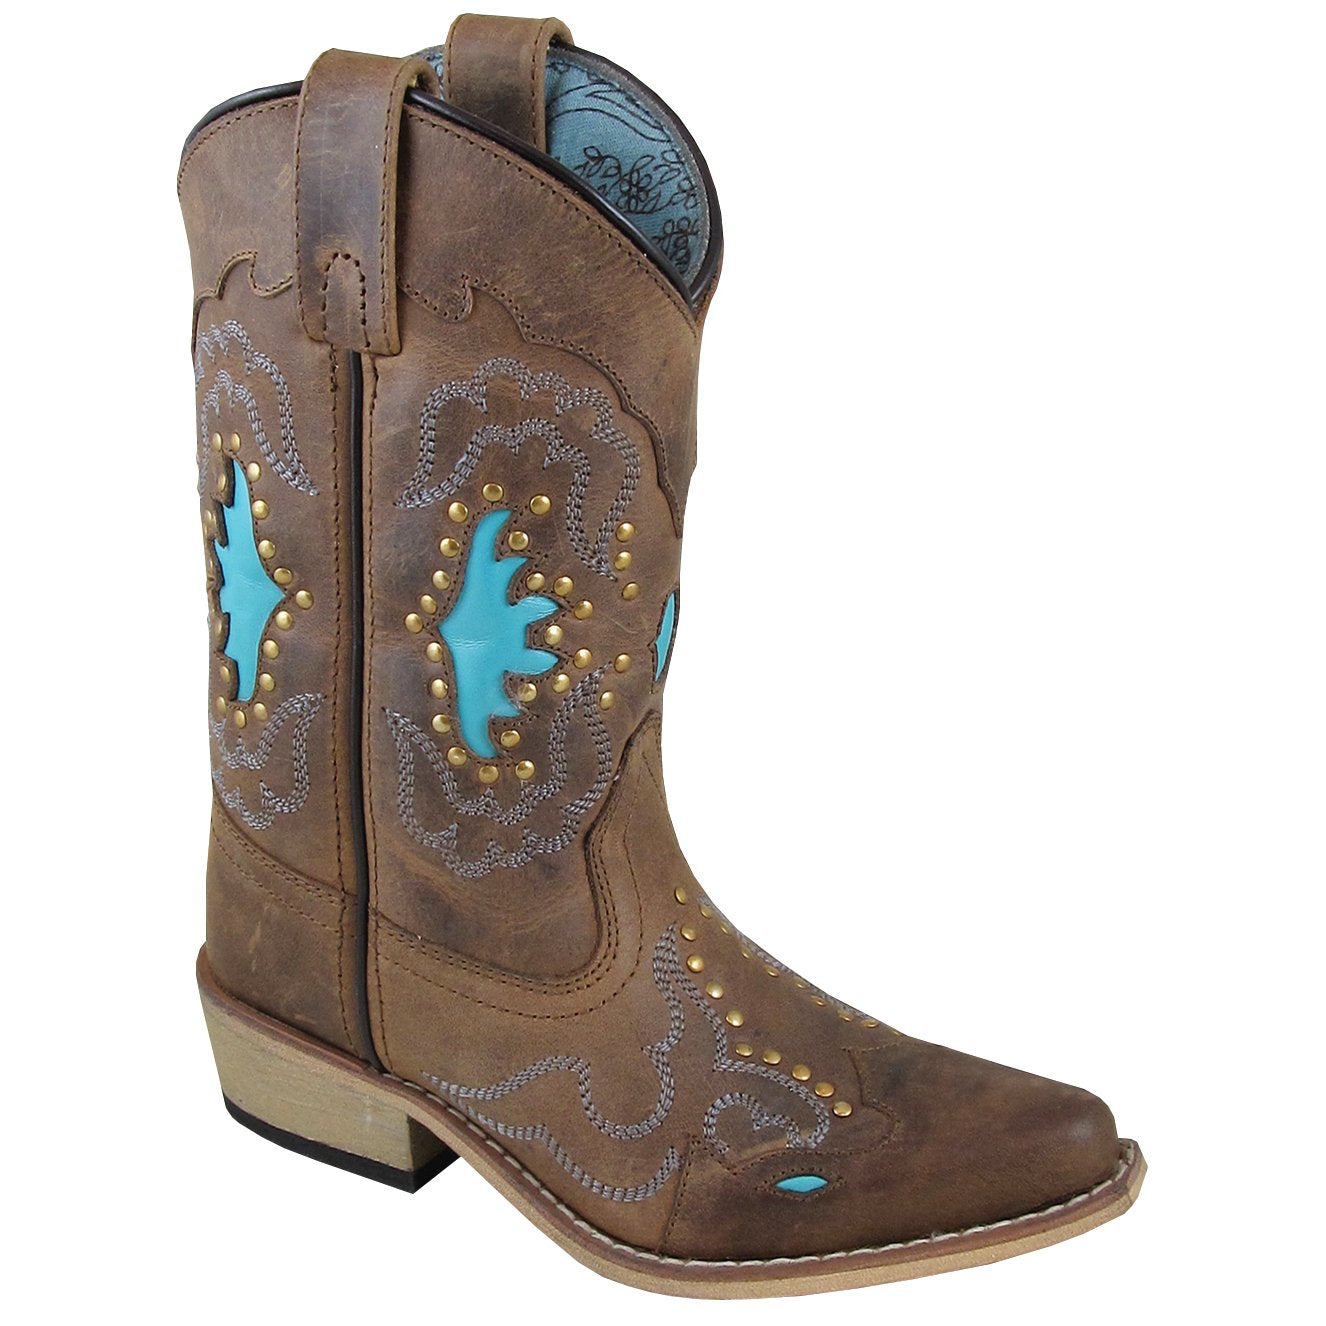 Smoky Mountain Girl's Youth Moon Bay Brown Distress/Turquoise Cowboy Boot